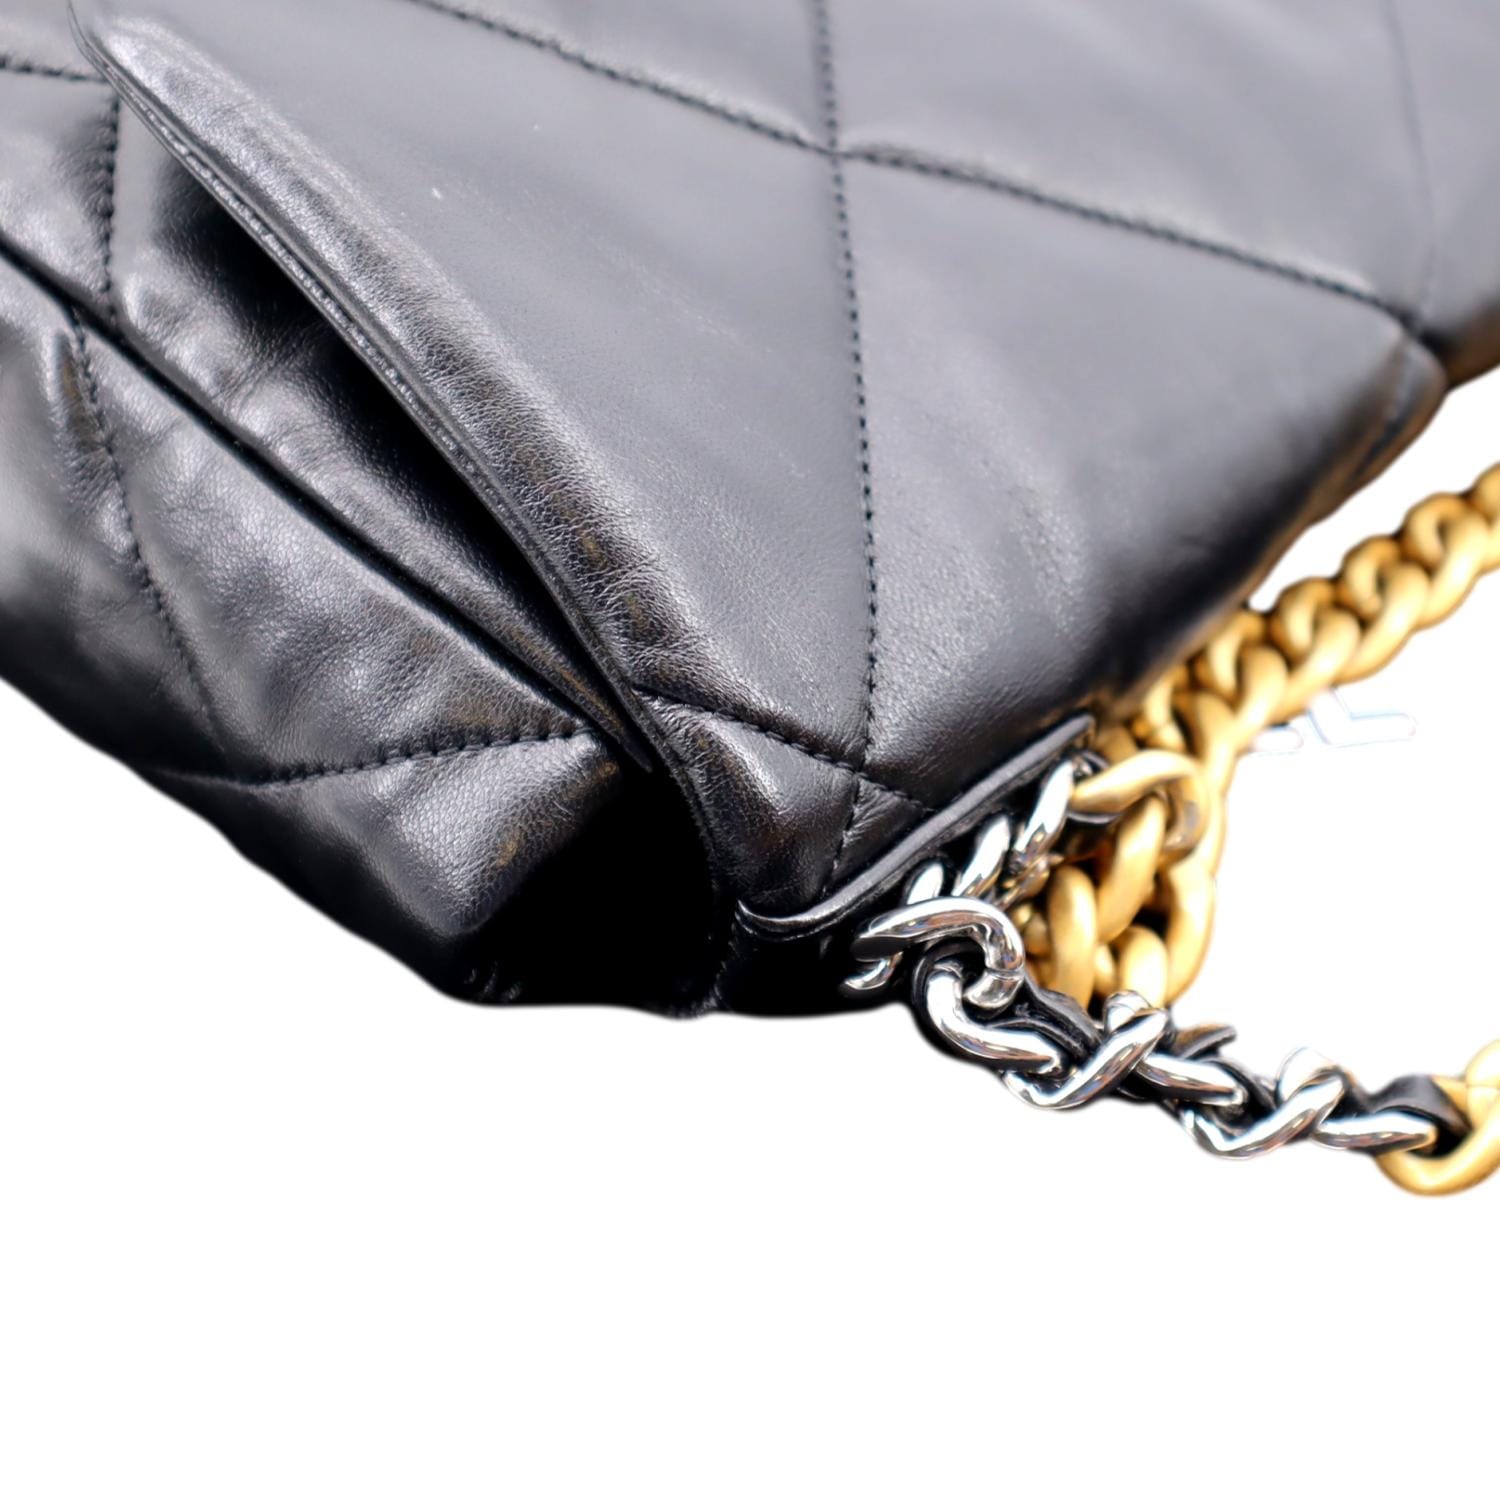 Chanel 19 Zip Wallet Small, Black Lambskin with Gold Hardware